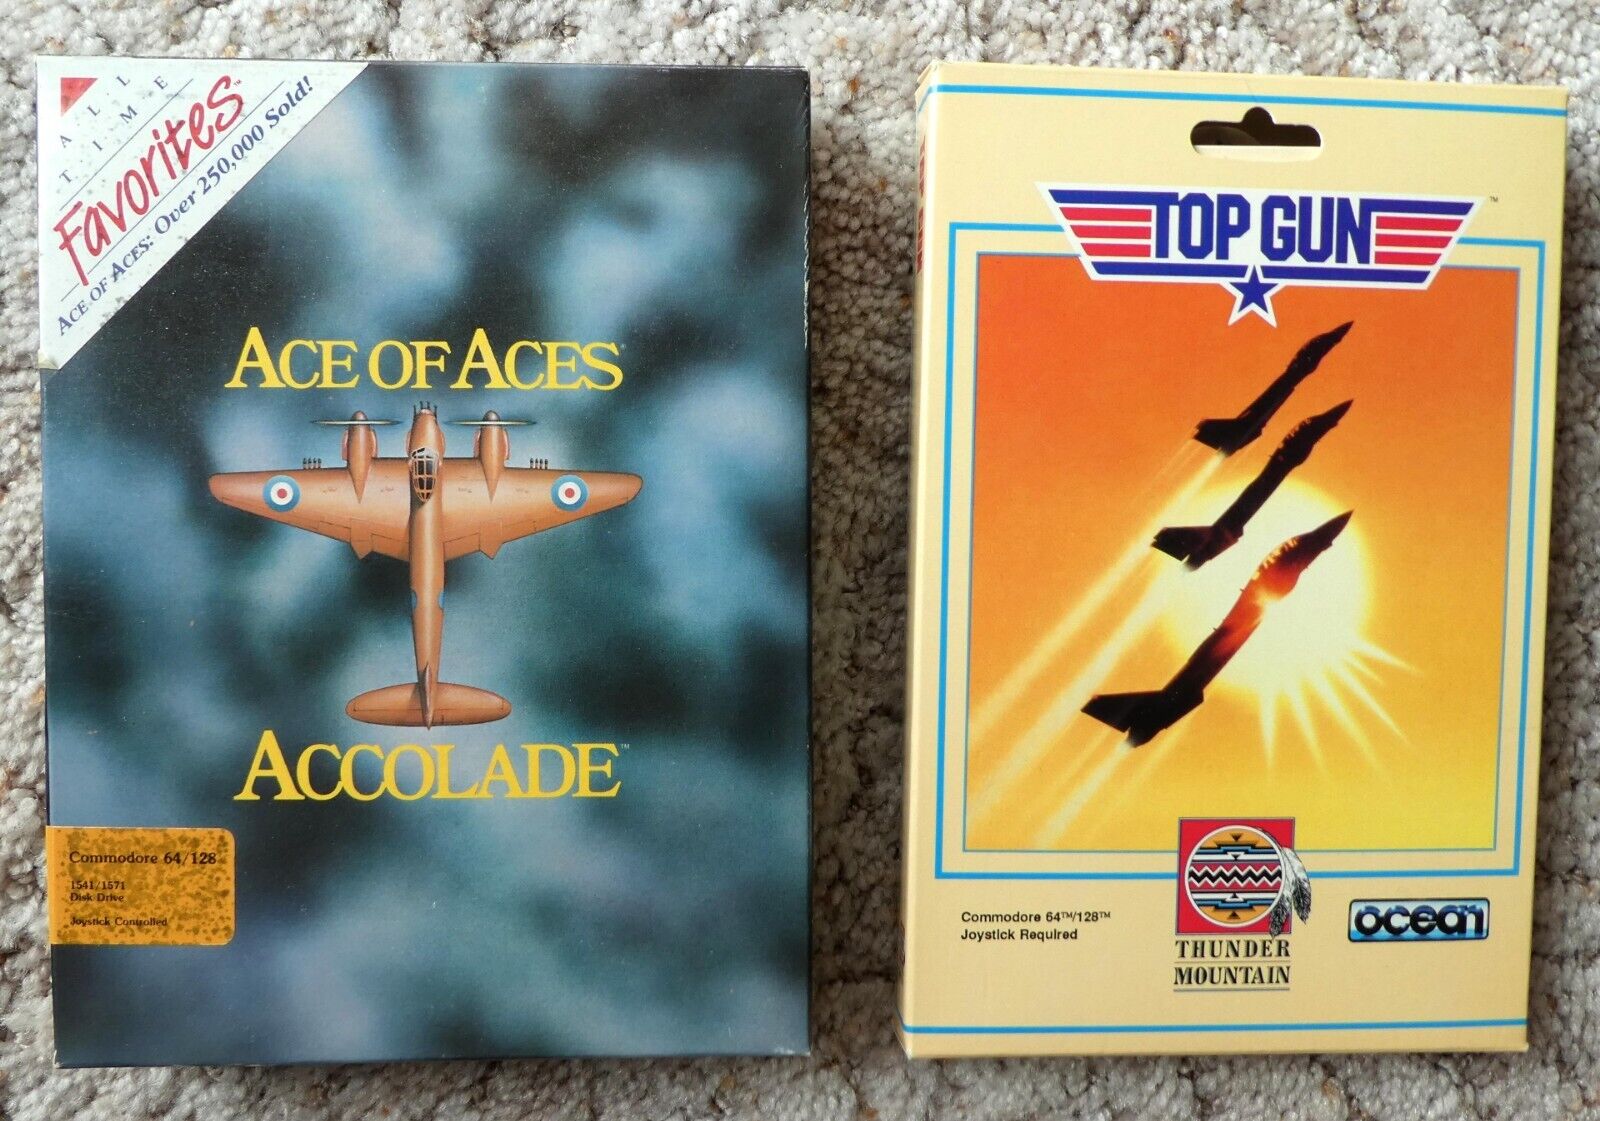 Ace of Aces & Top Gun: Lot of 2 Classic Flight Sim Games for Commodore 64 128